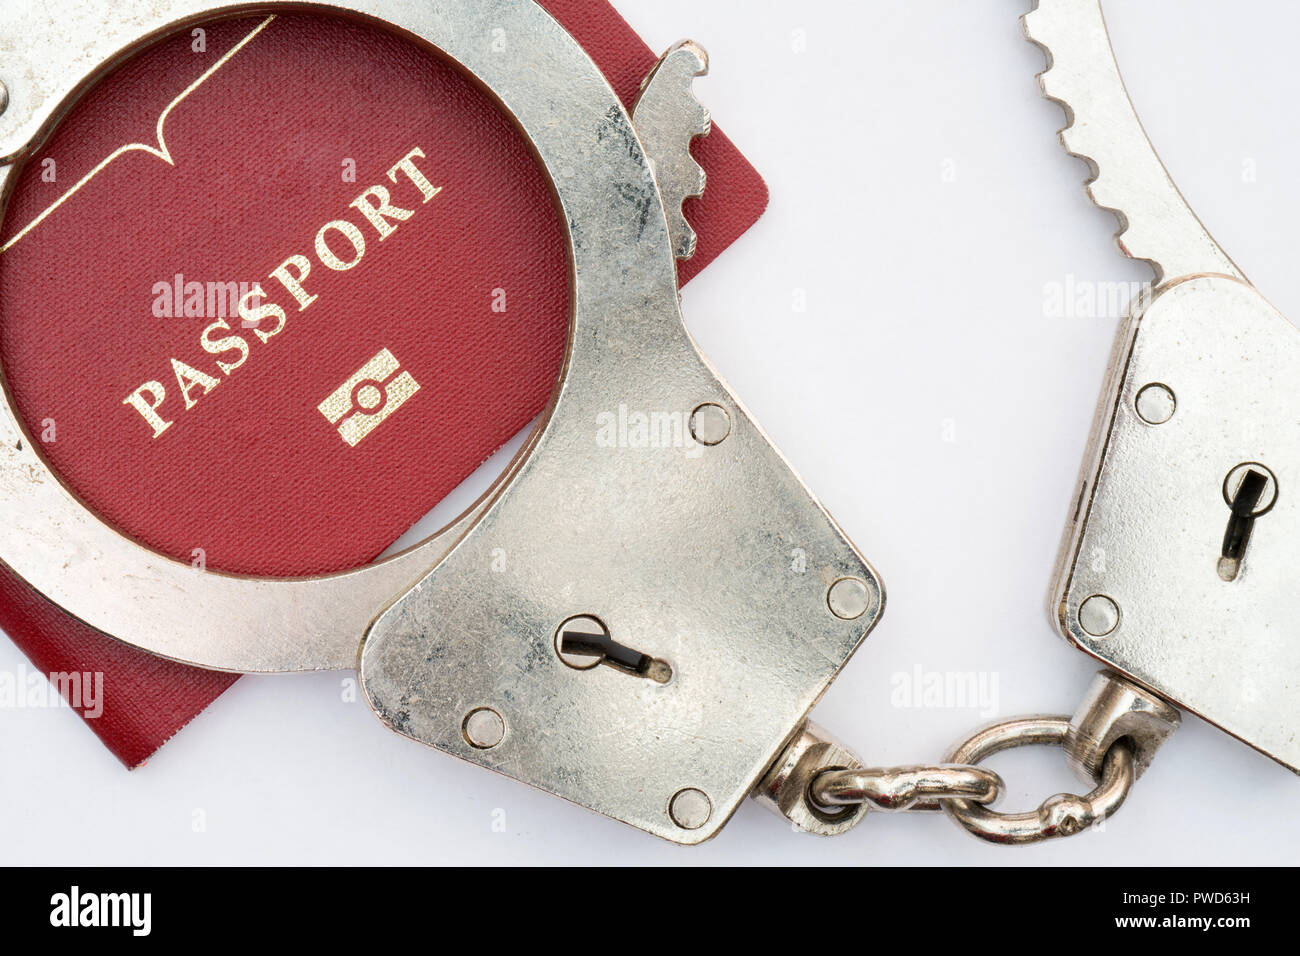 red passport on white background and handcuffs Stock Photo